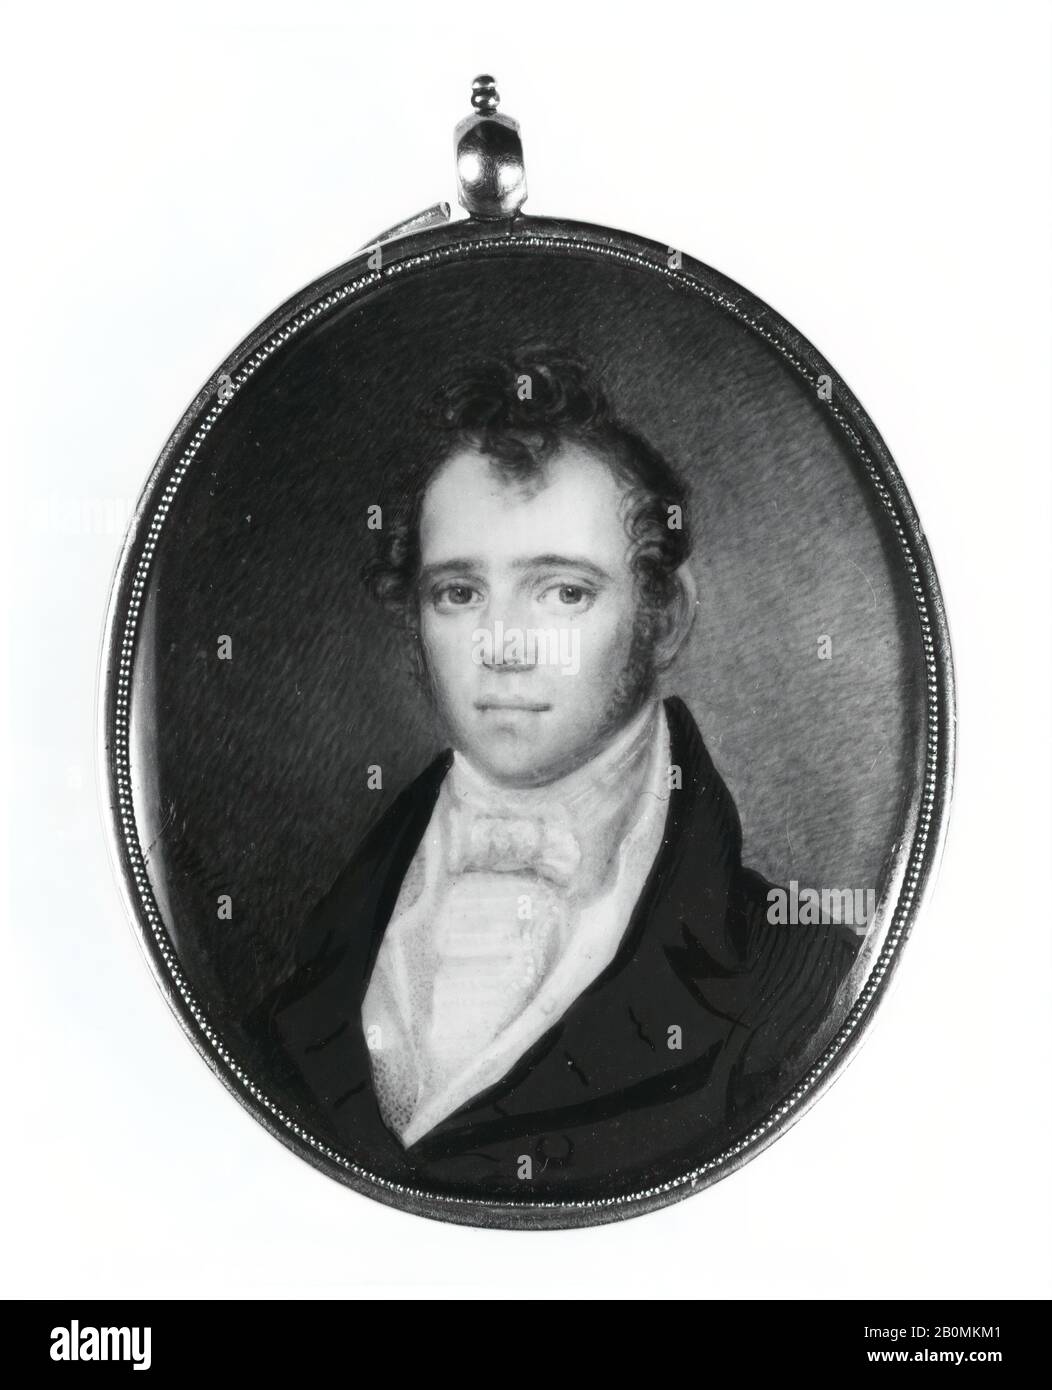 Henry Williams, John Cox, American, Henry Williams (American, Boston, Massachusetts 1787–1830 Boston, Massachusetts), ca. 1810, American, Watercolor on ivory, 2 17/32 x 2 1/16 in. (6.4 x 5.2 cm), Paintings Stock Photo